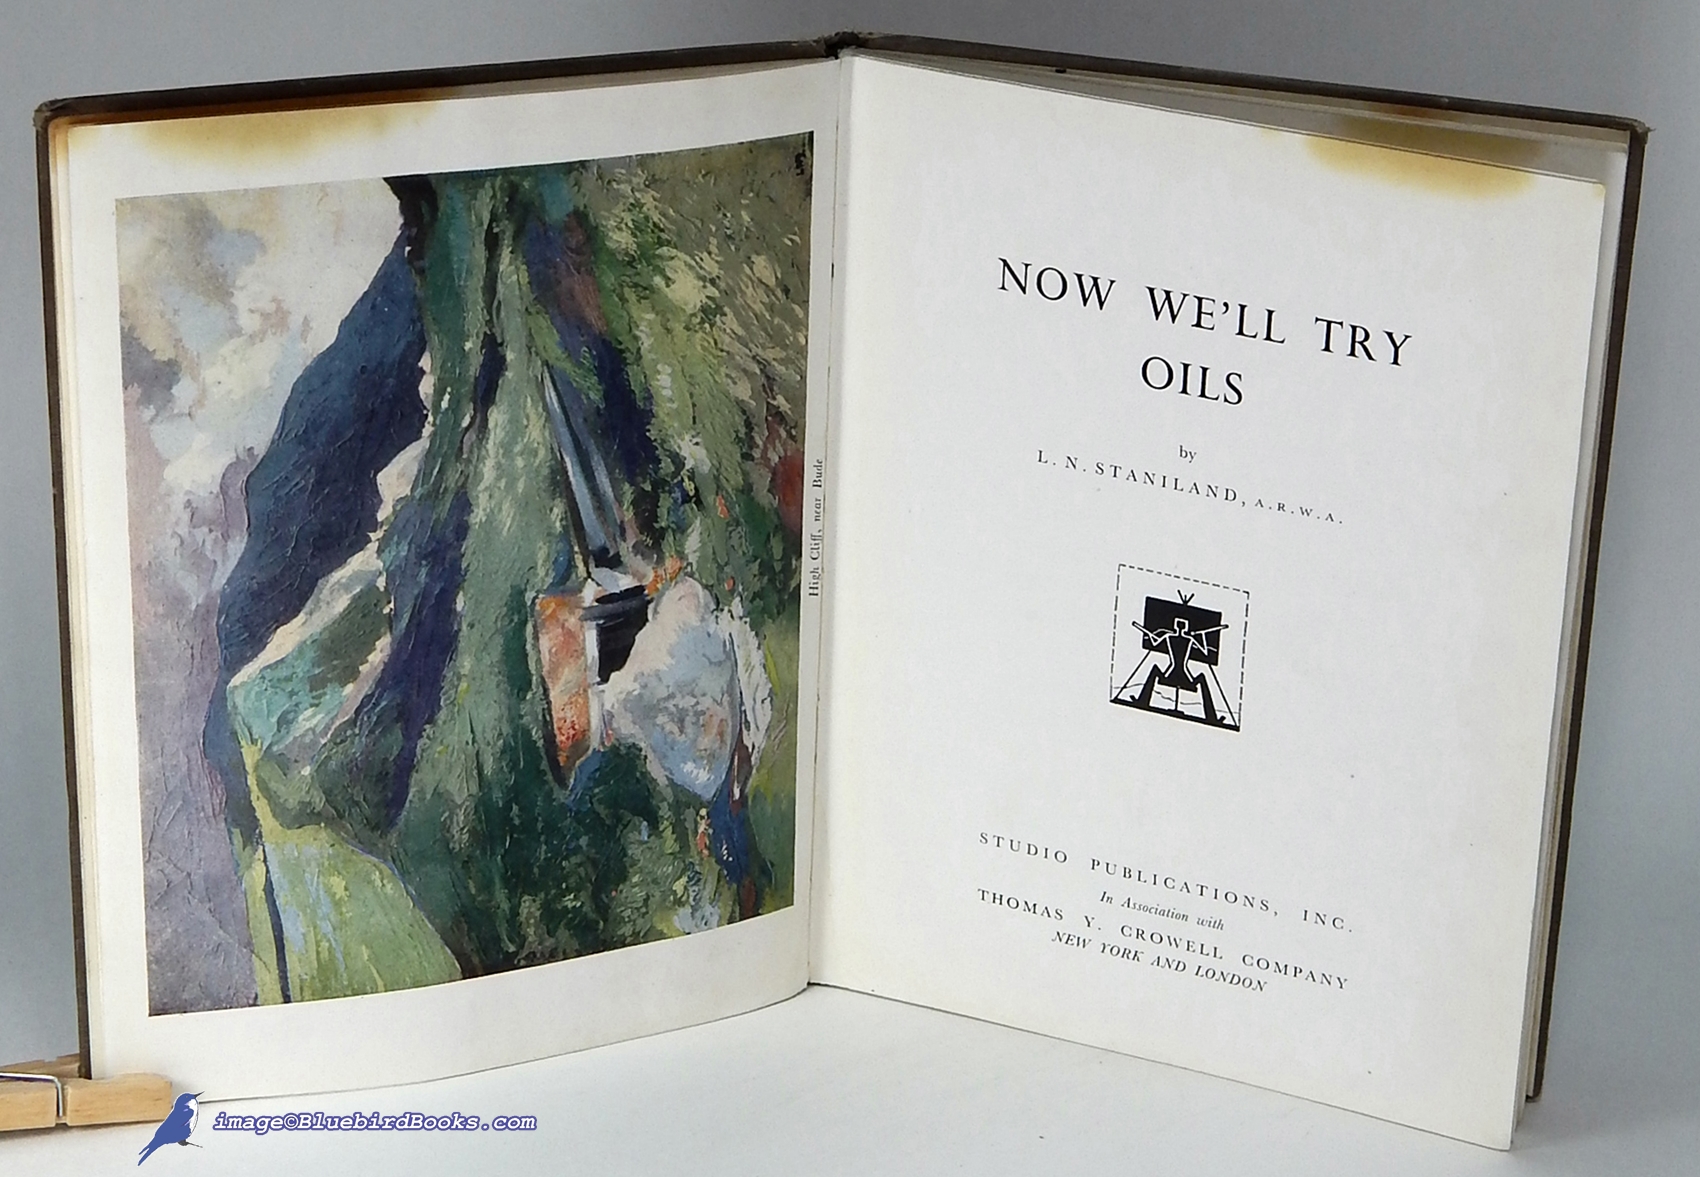 STANILAND, L. N. - Now We'LL Try Oils